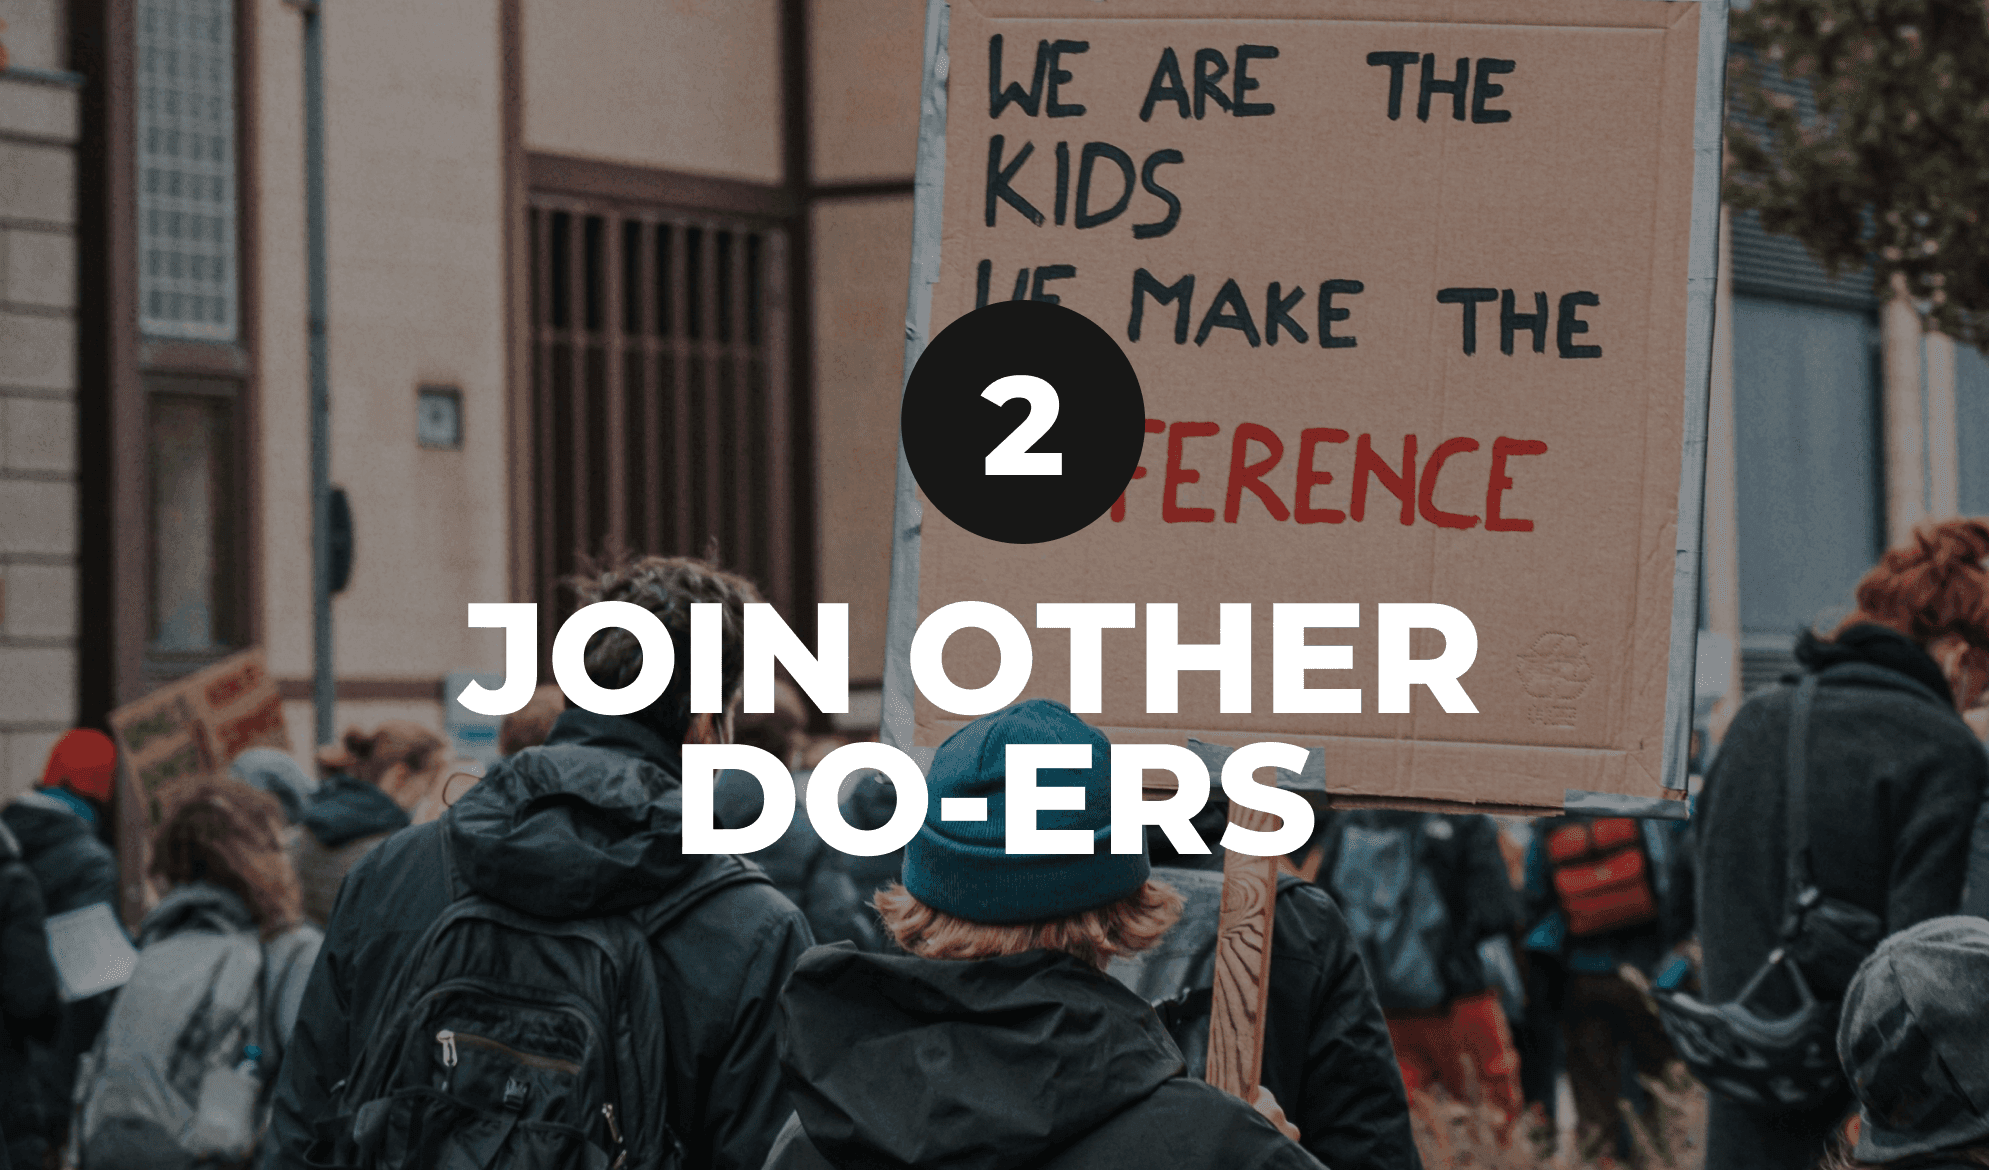 Title: "2. Join other do-ers" (With image of people protesting)